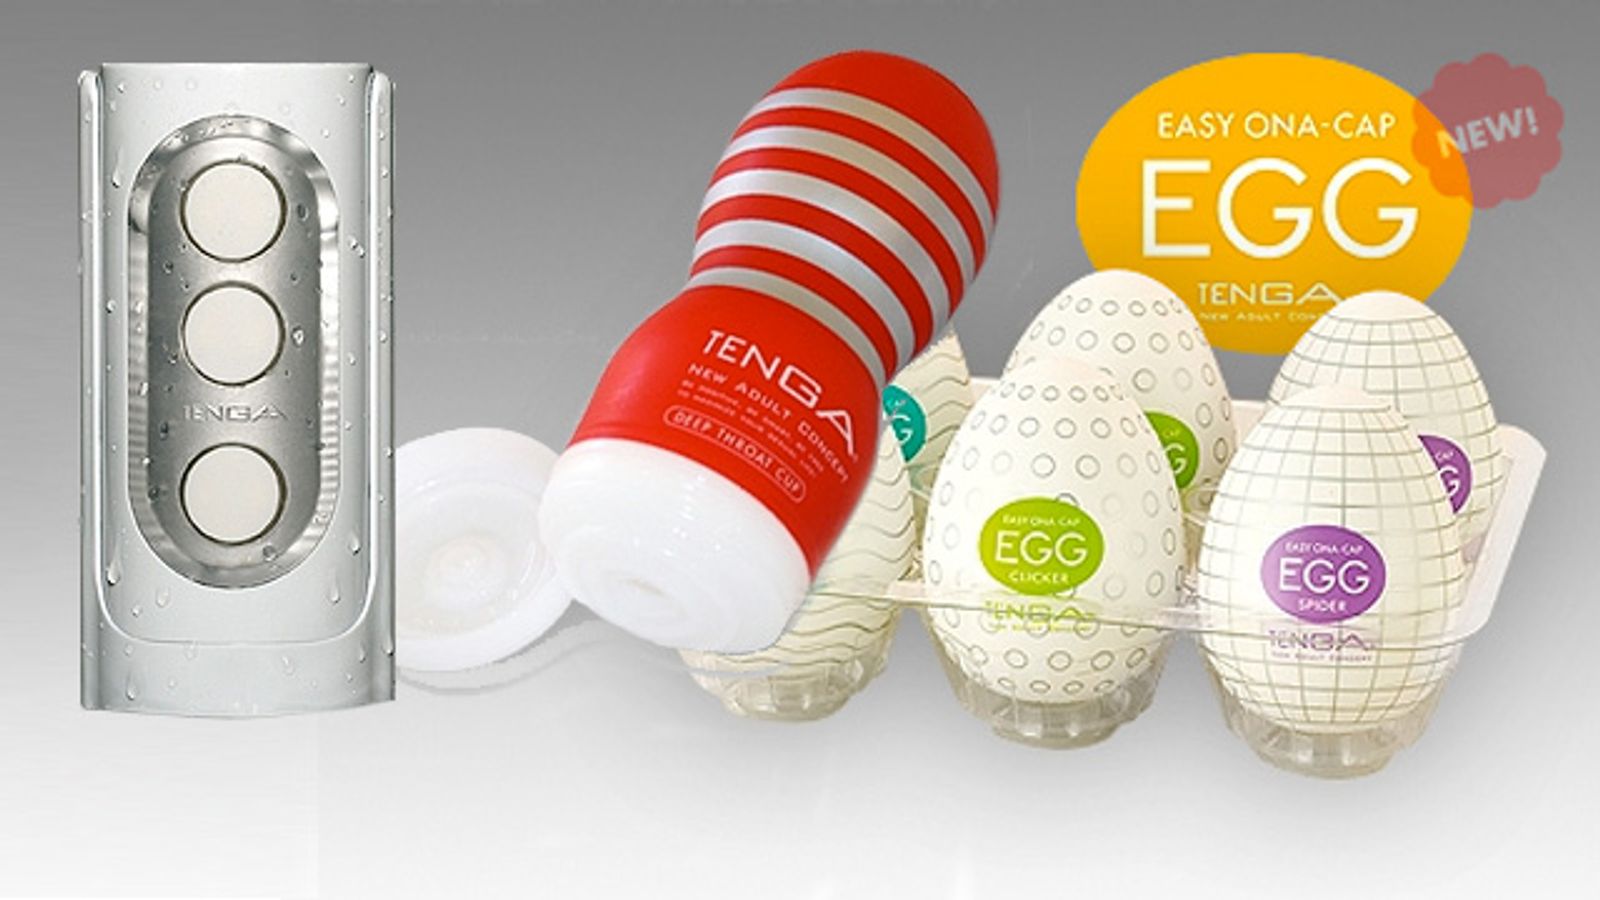 Liberator Partners with Tenga as Exclusive Provider for North America